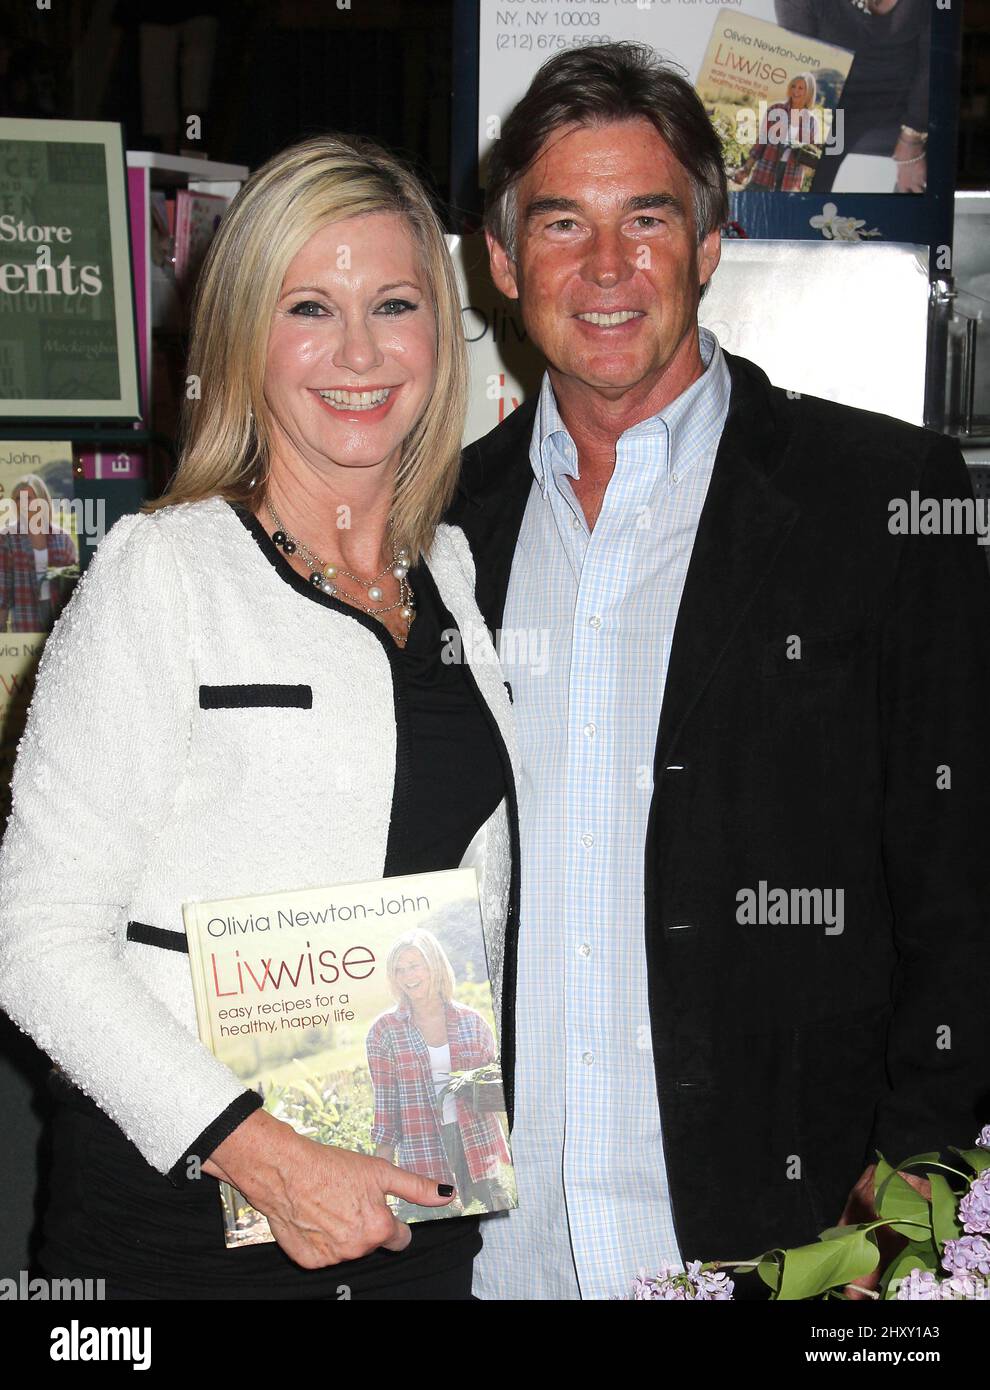 Olivia Newton John And John Easterling During The Livwise Book